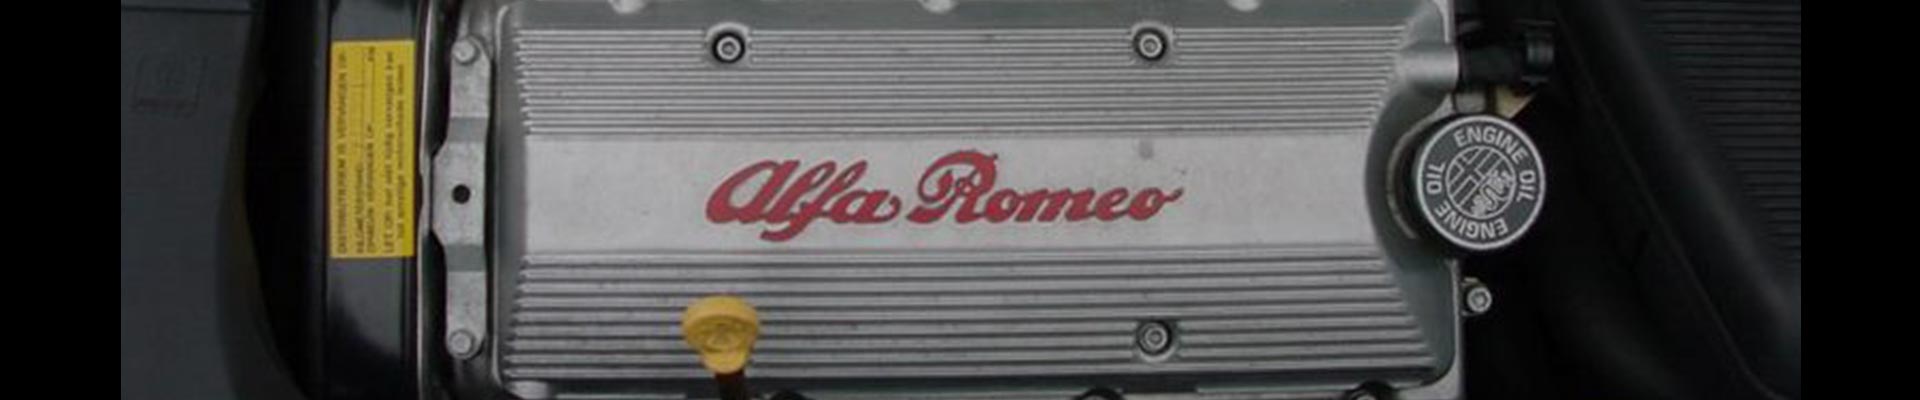 Shop Replacement 1984 Alfa Romeo GTV-6 Parts with Discounted Price on the Net